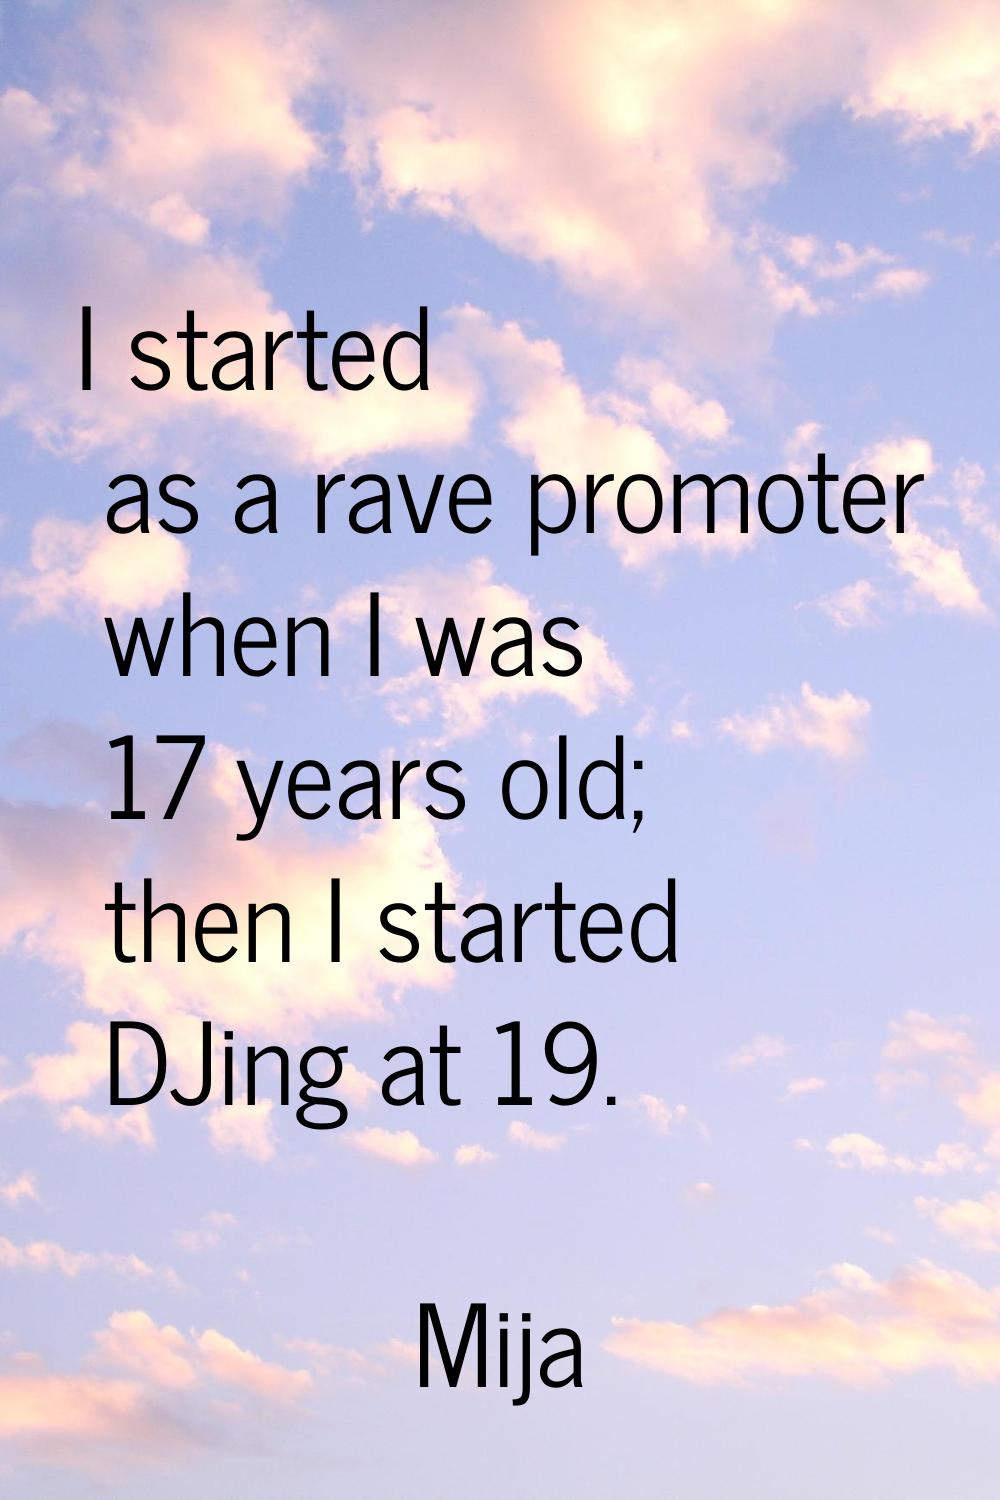 I started as a rave promoter when I was 17 years old; then I started DJing at 19.